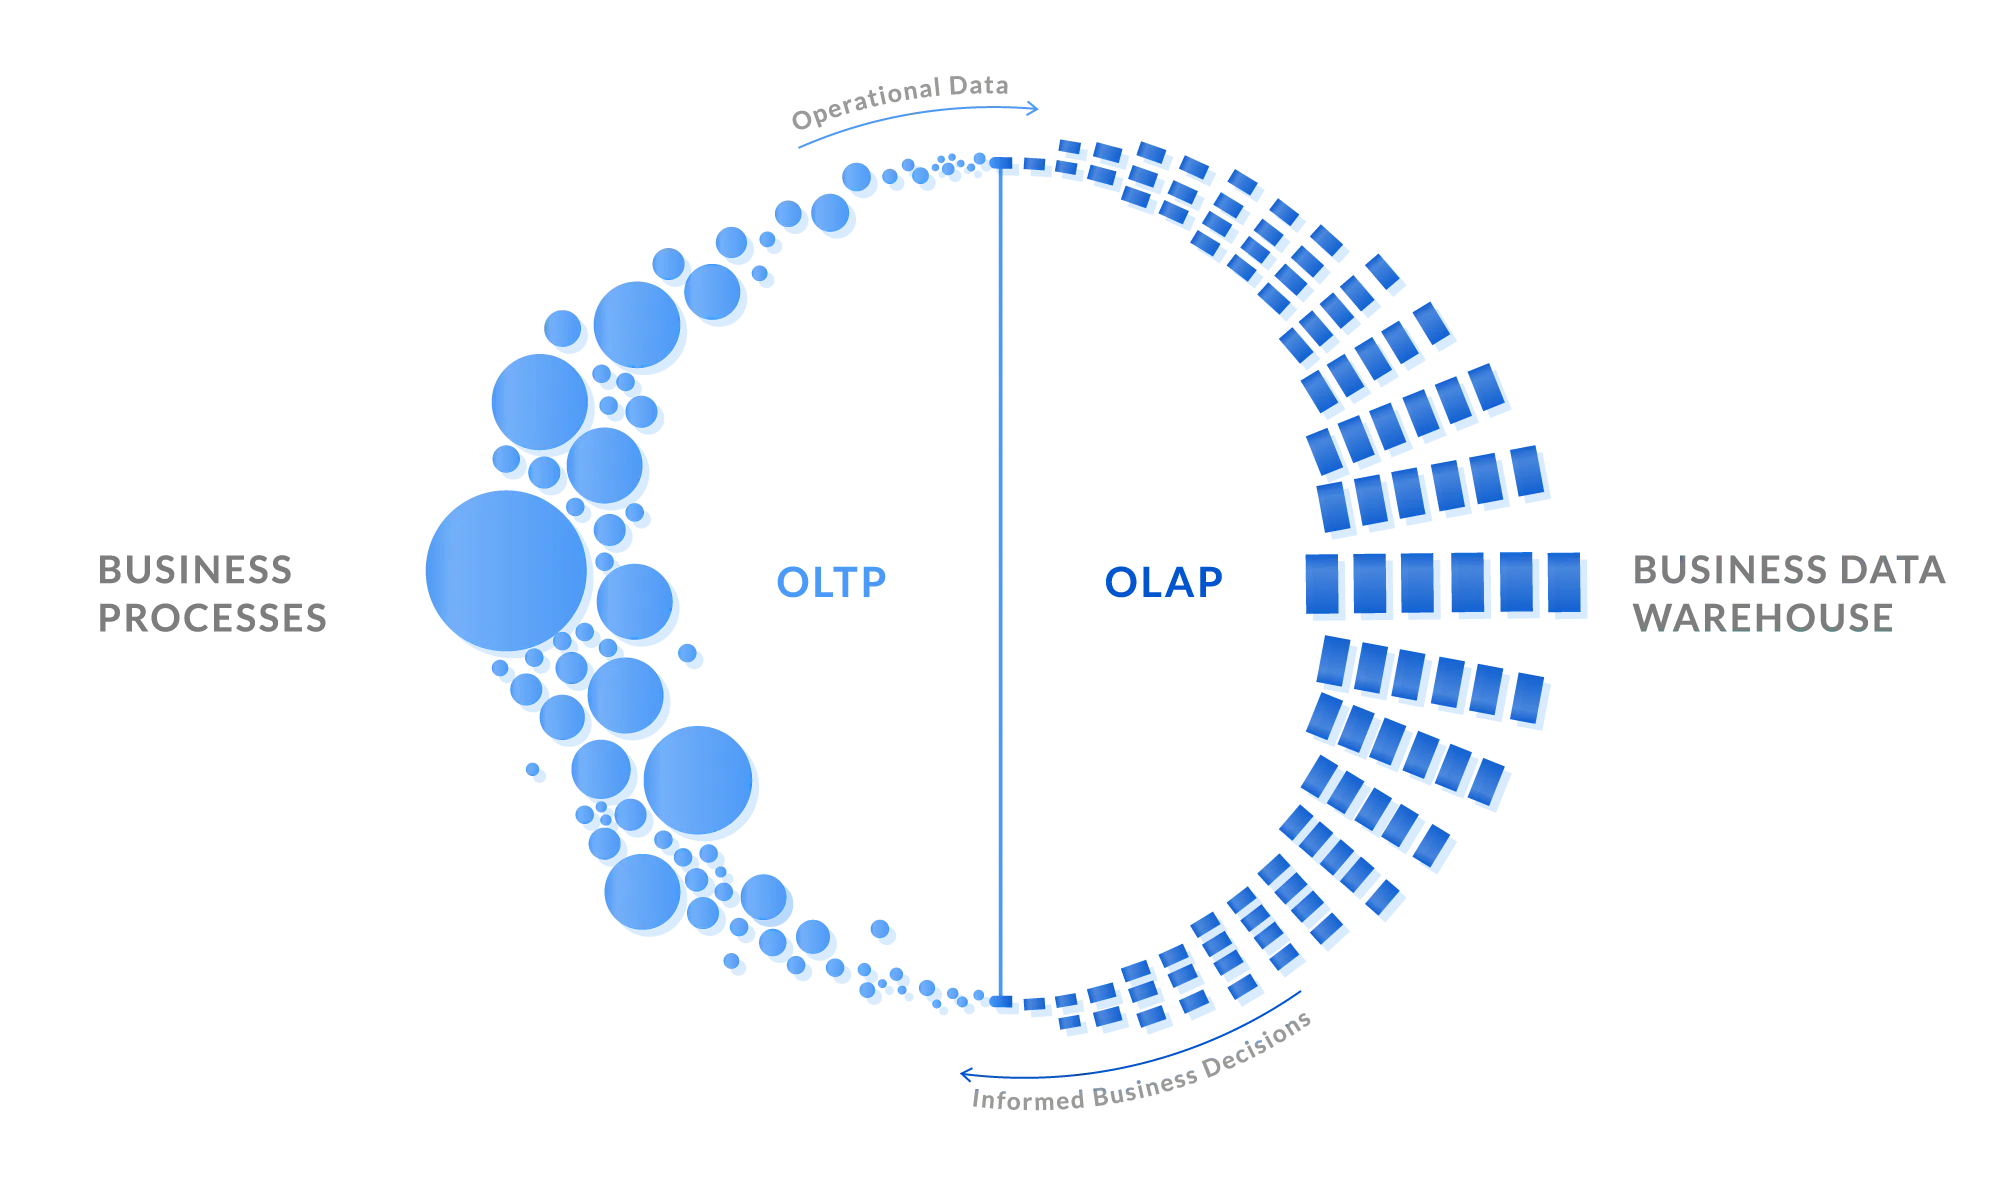 The Relation between OLTP and OLAP